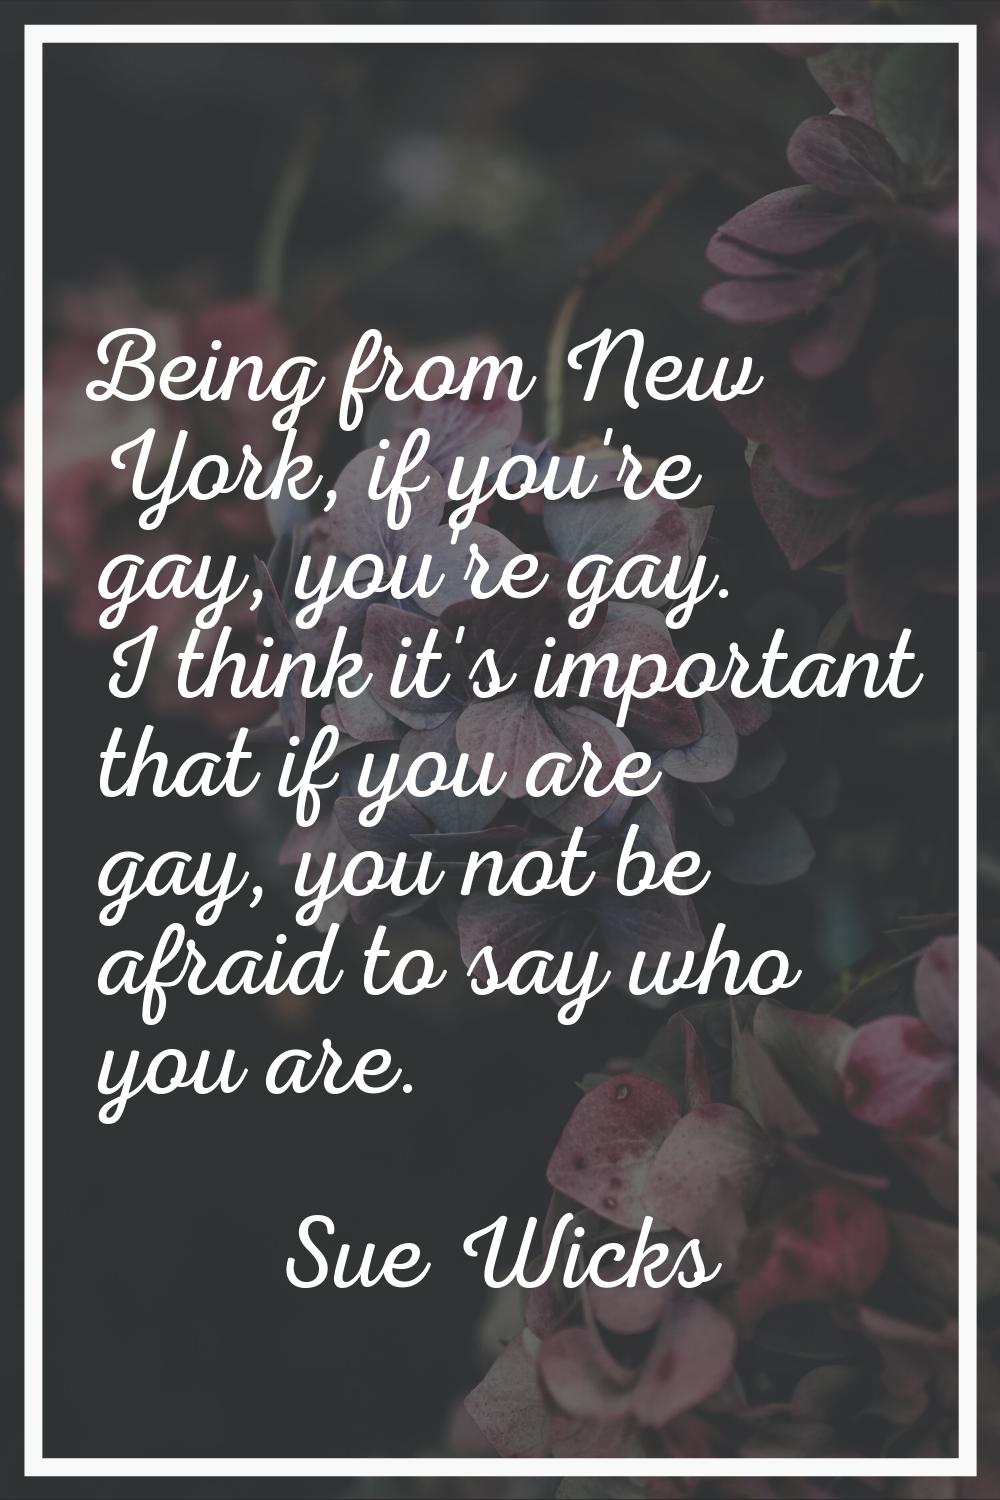 Being from New York, if you're gay, you're gay. I think it's important that if you are gay, you not